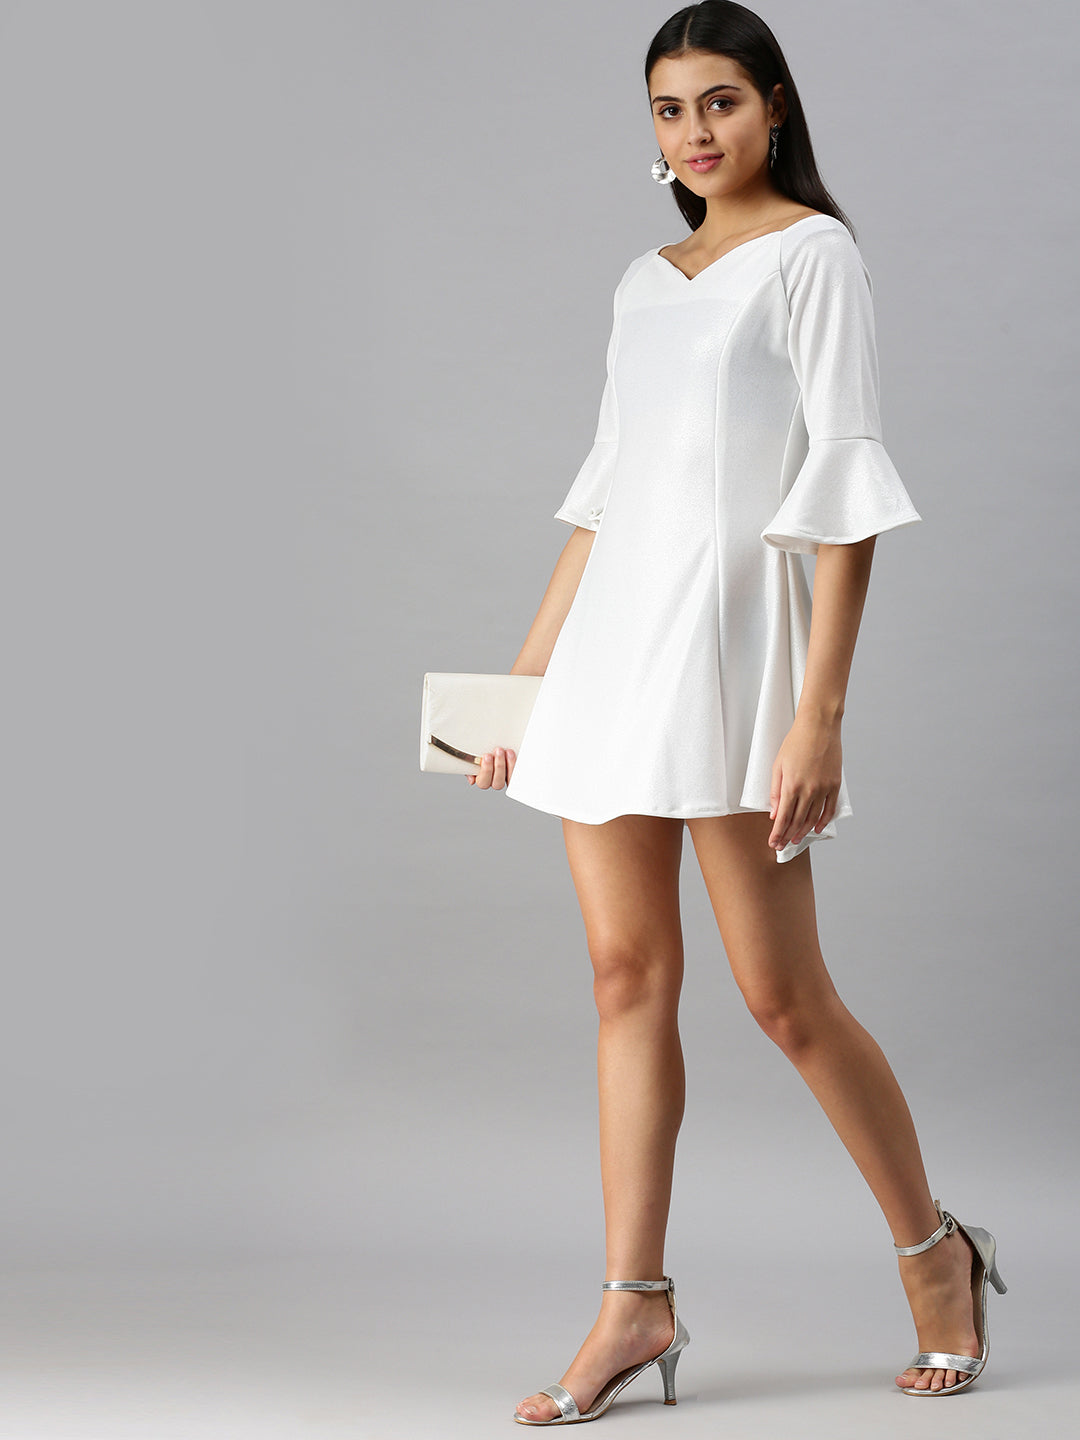 Women's Fit and Flare White Solid Dress